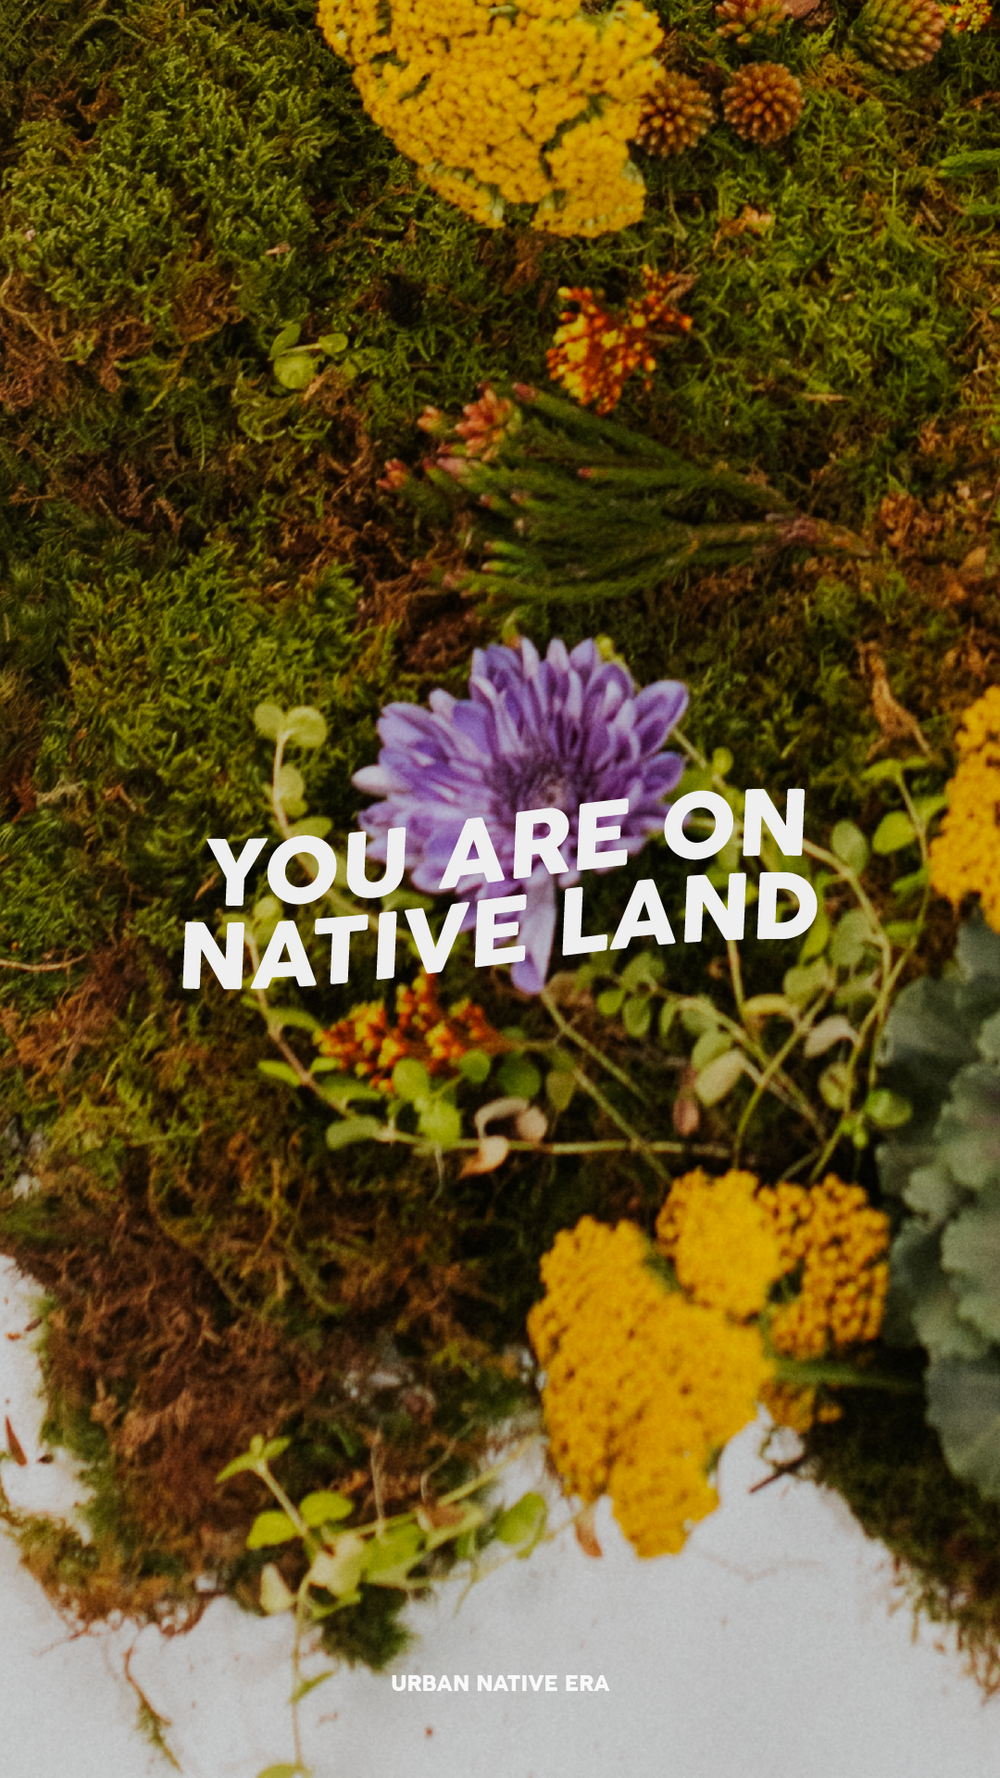 'You Are On Native Land' Phone Wallpaper